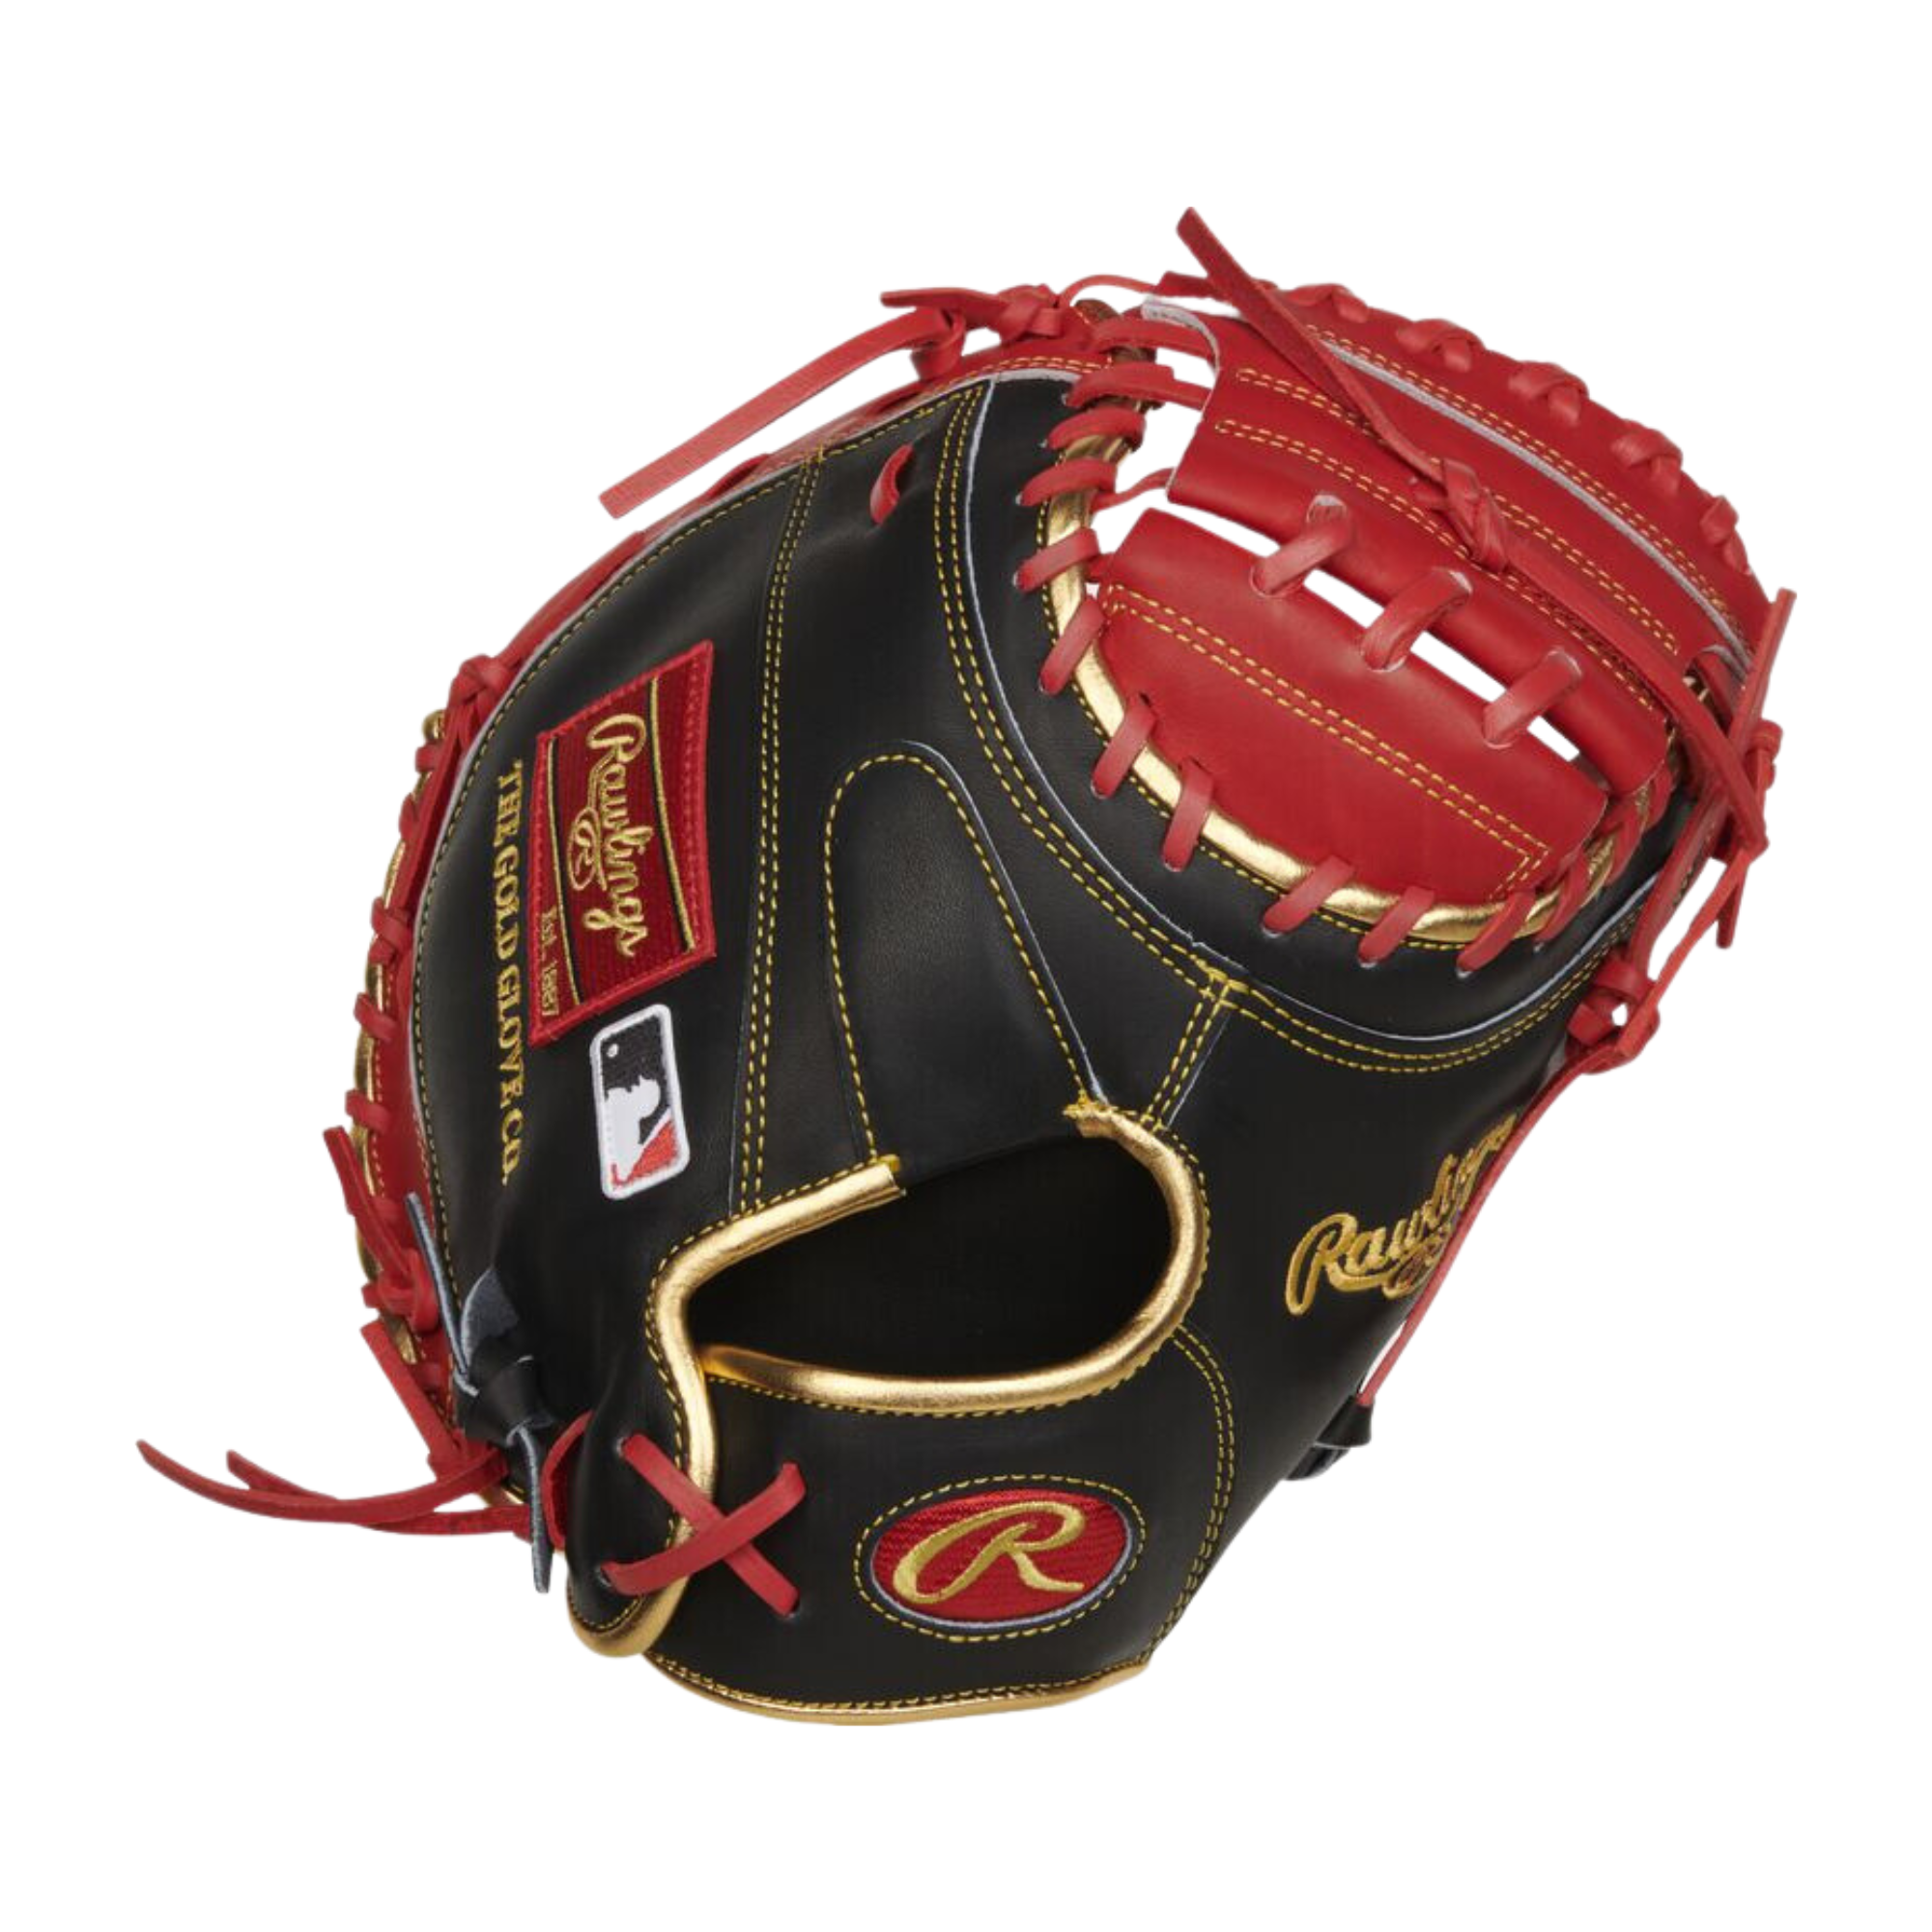 Rawlings Heart of the Hide 34-Inch Catcher's Mitt, Yadier Molina